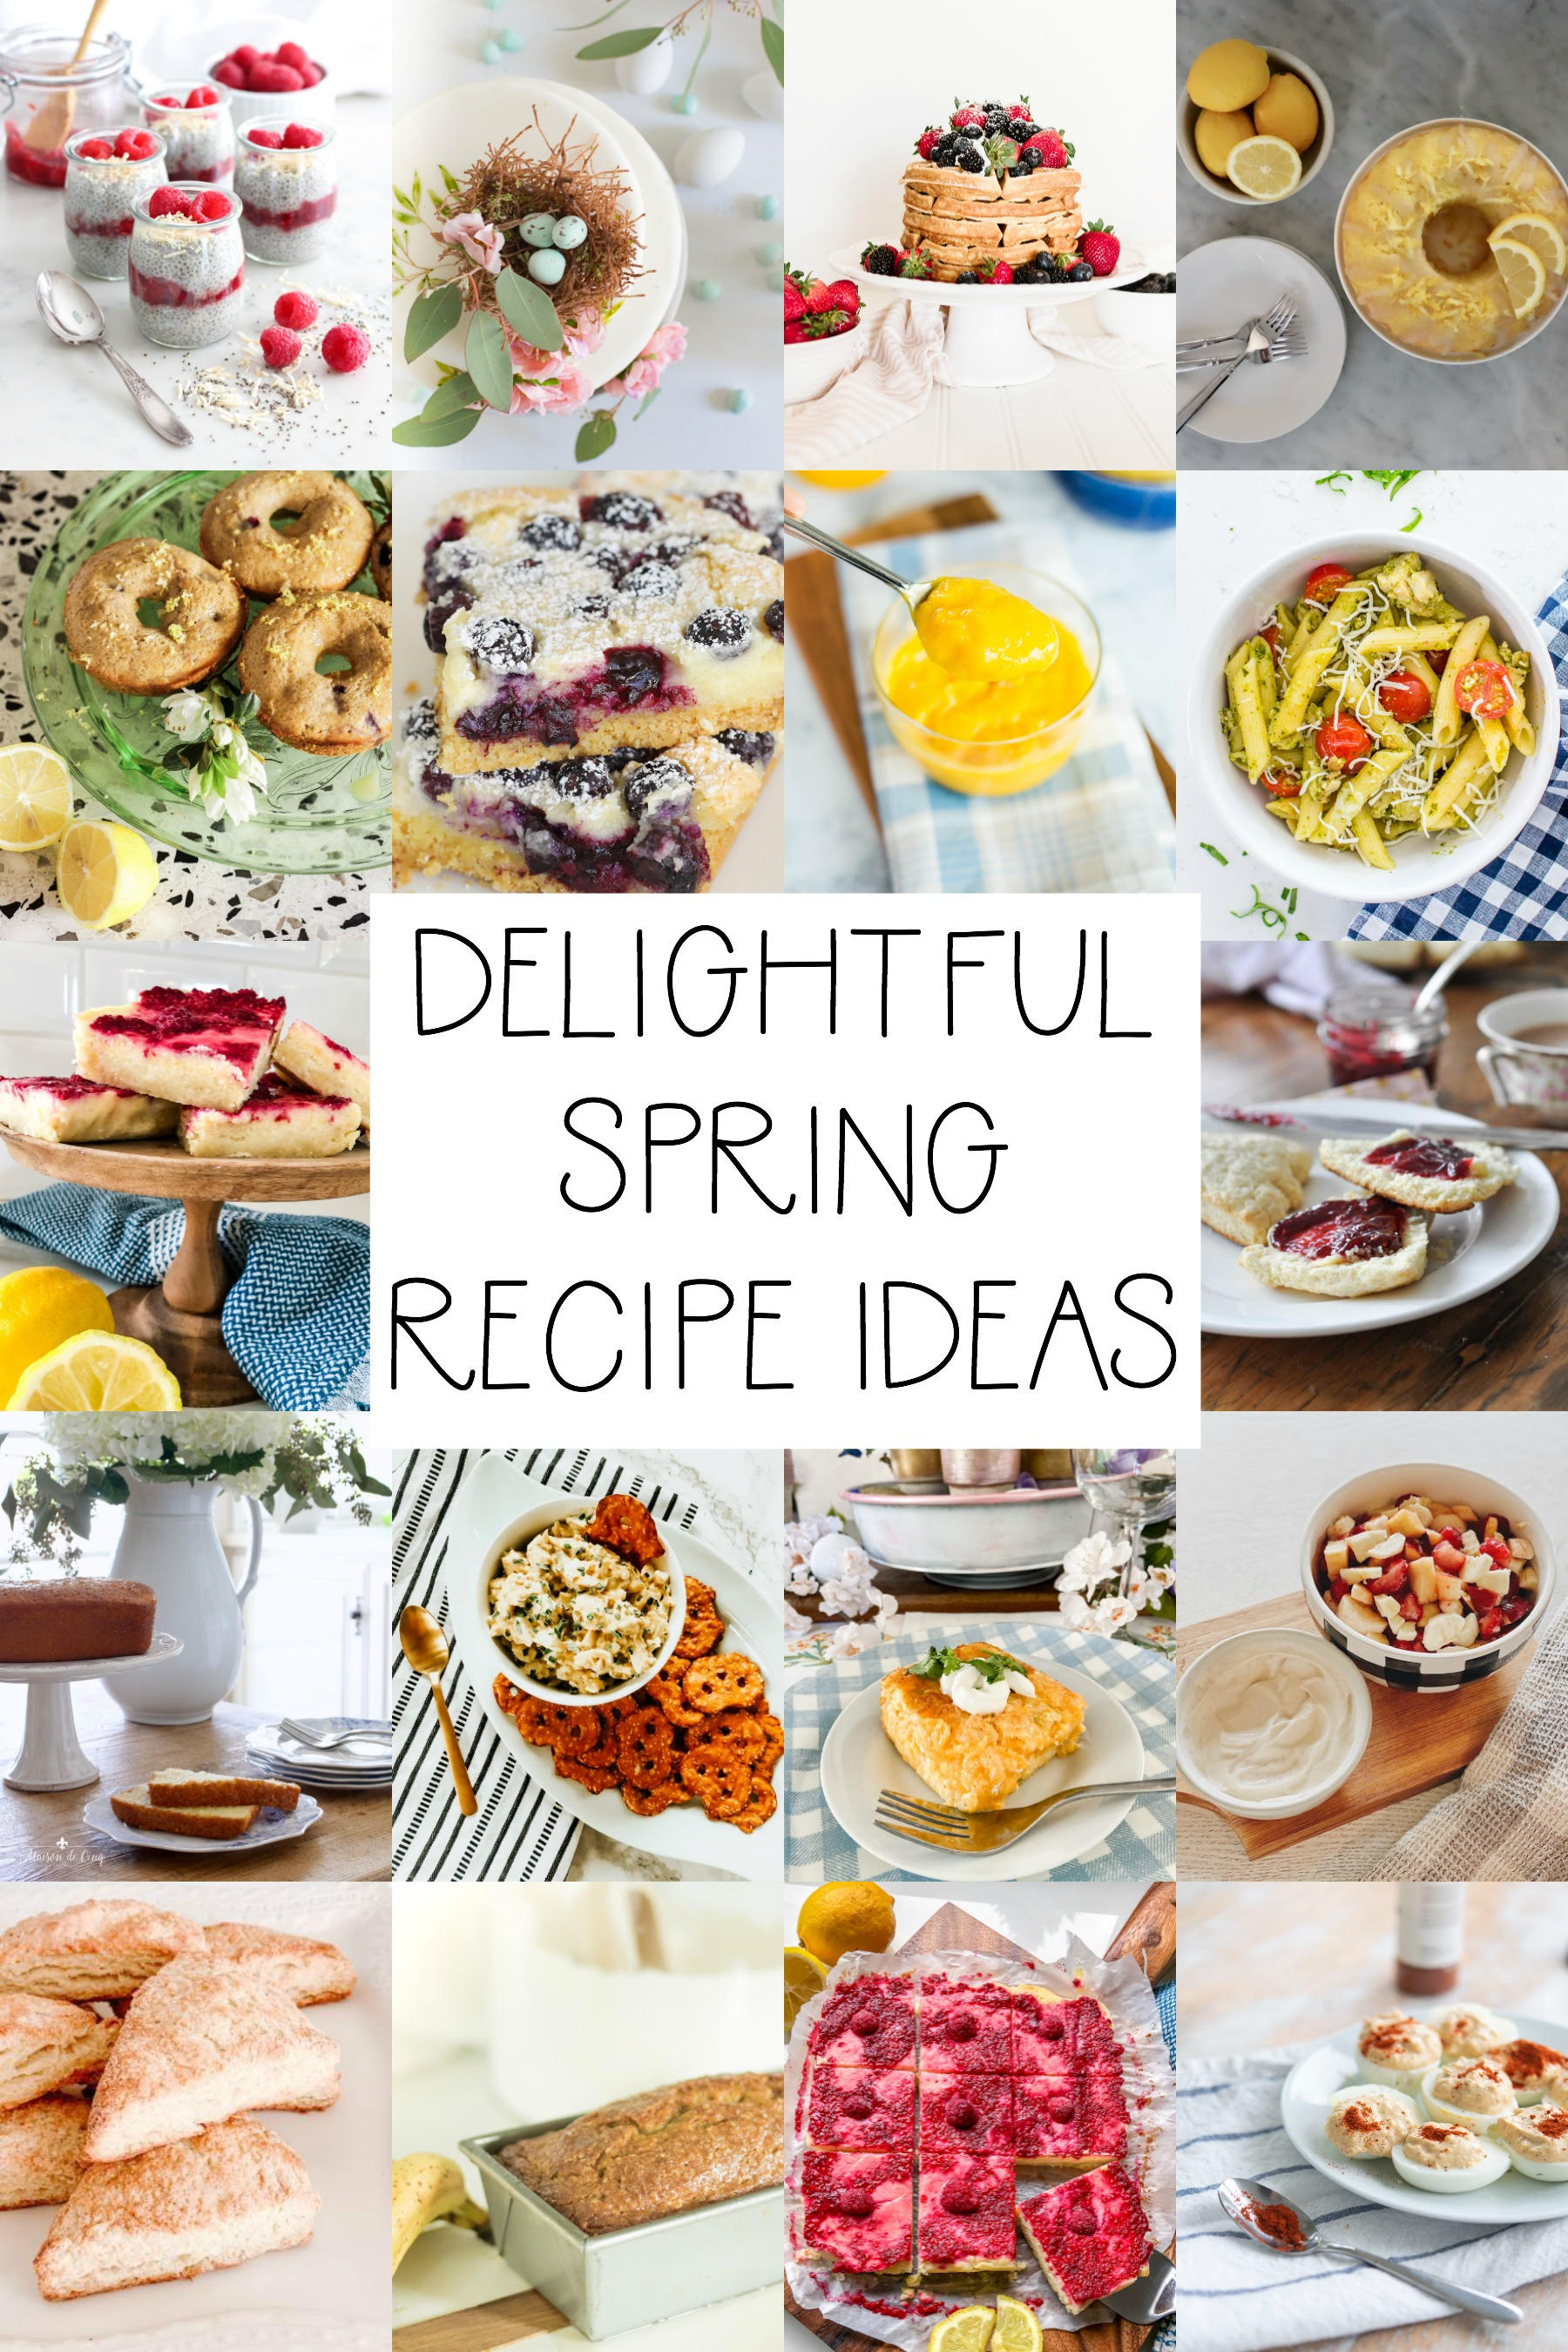 Delicious Spring Recipe Ideas - This is our Bliss - This is our Bliss